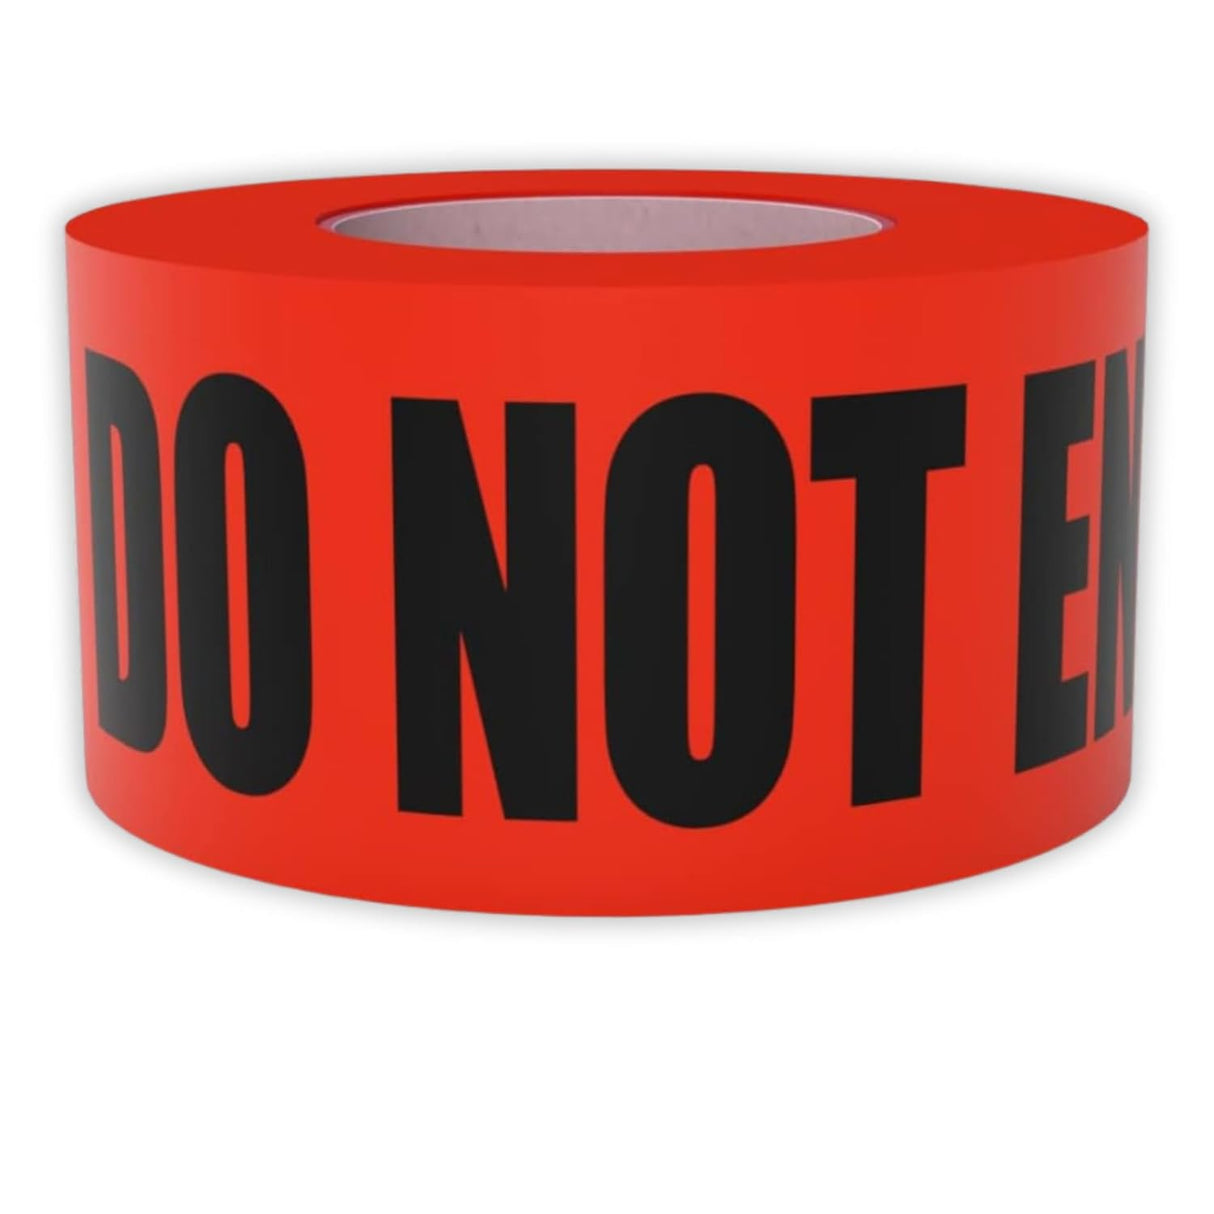 SINGHAL Do Not Enter Barricade Tape 3 Inch X 300 Meter, Red with Bold Black Print, Wide for Maximum Readability, Tear Resistant Design, High Visibility 300mtr